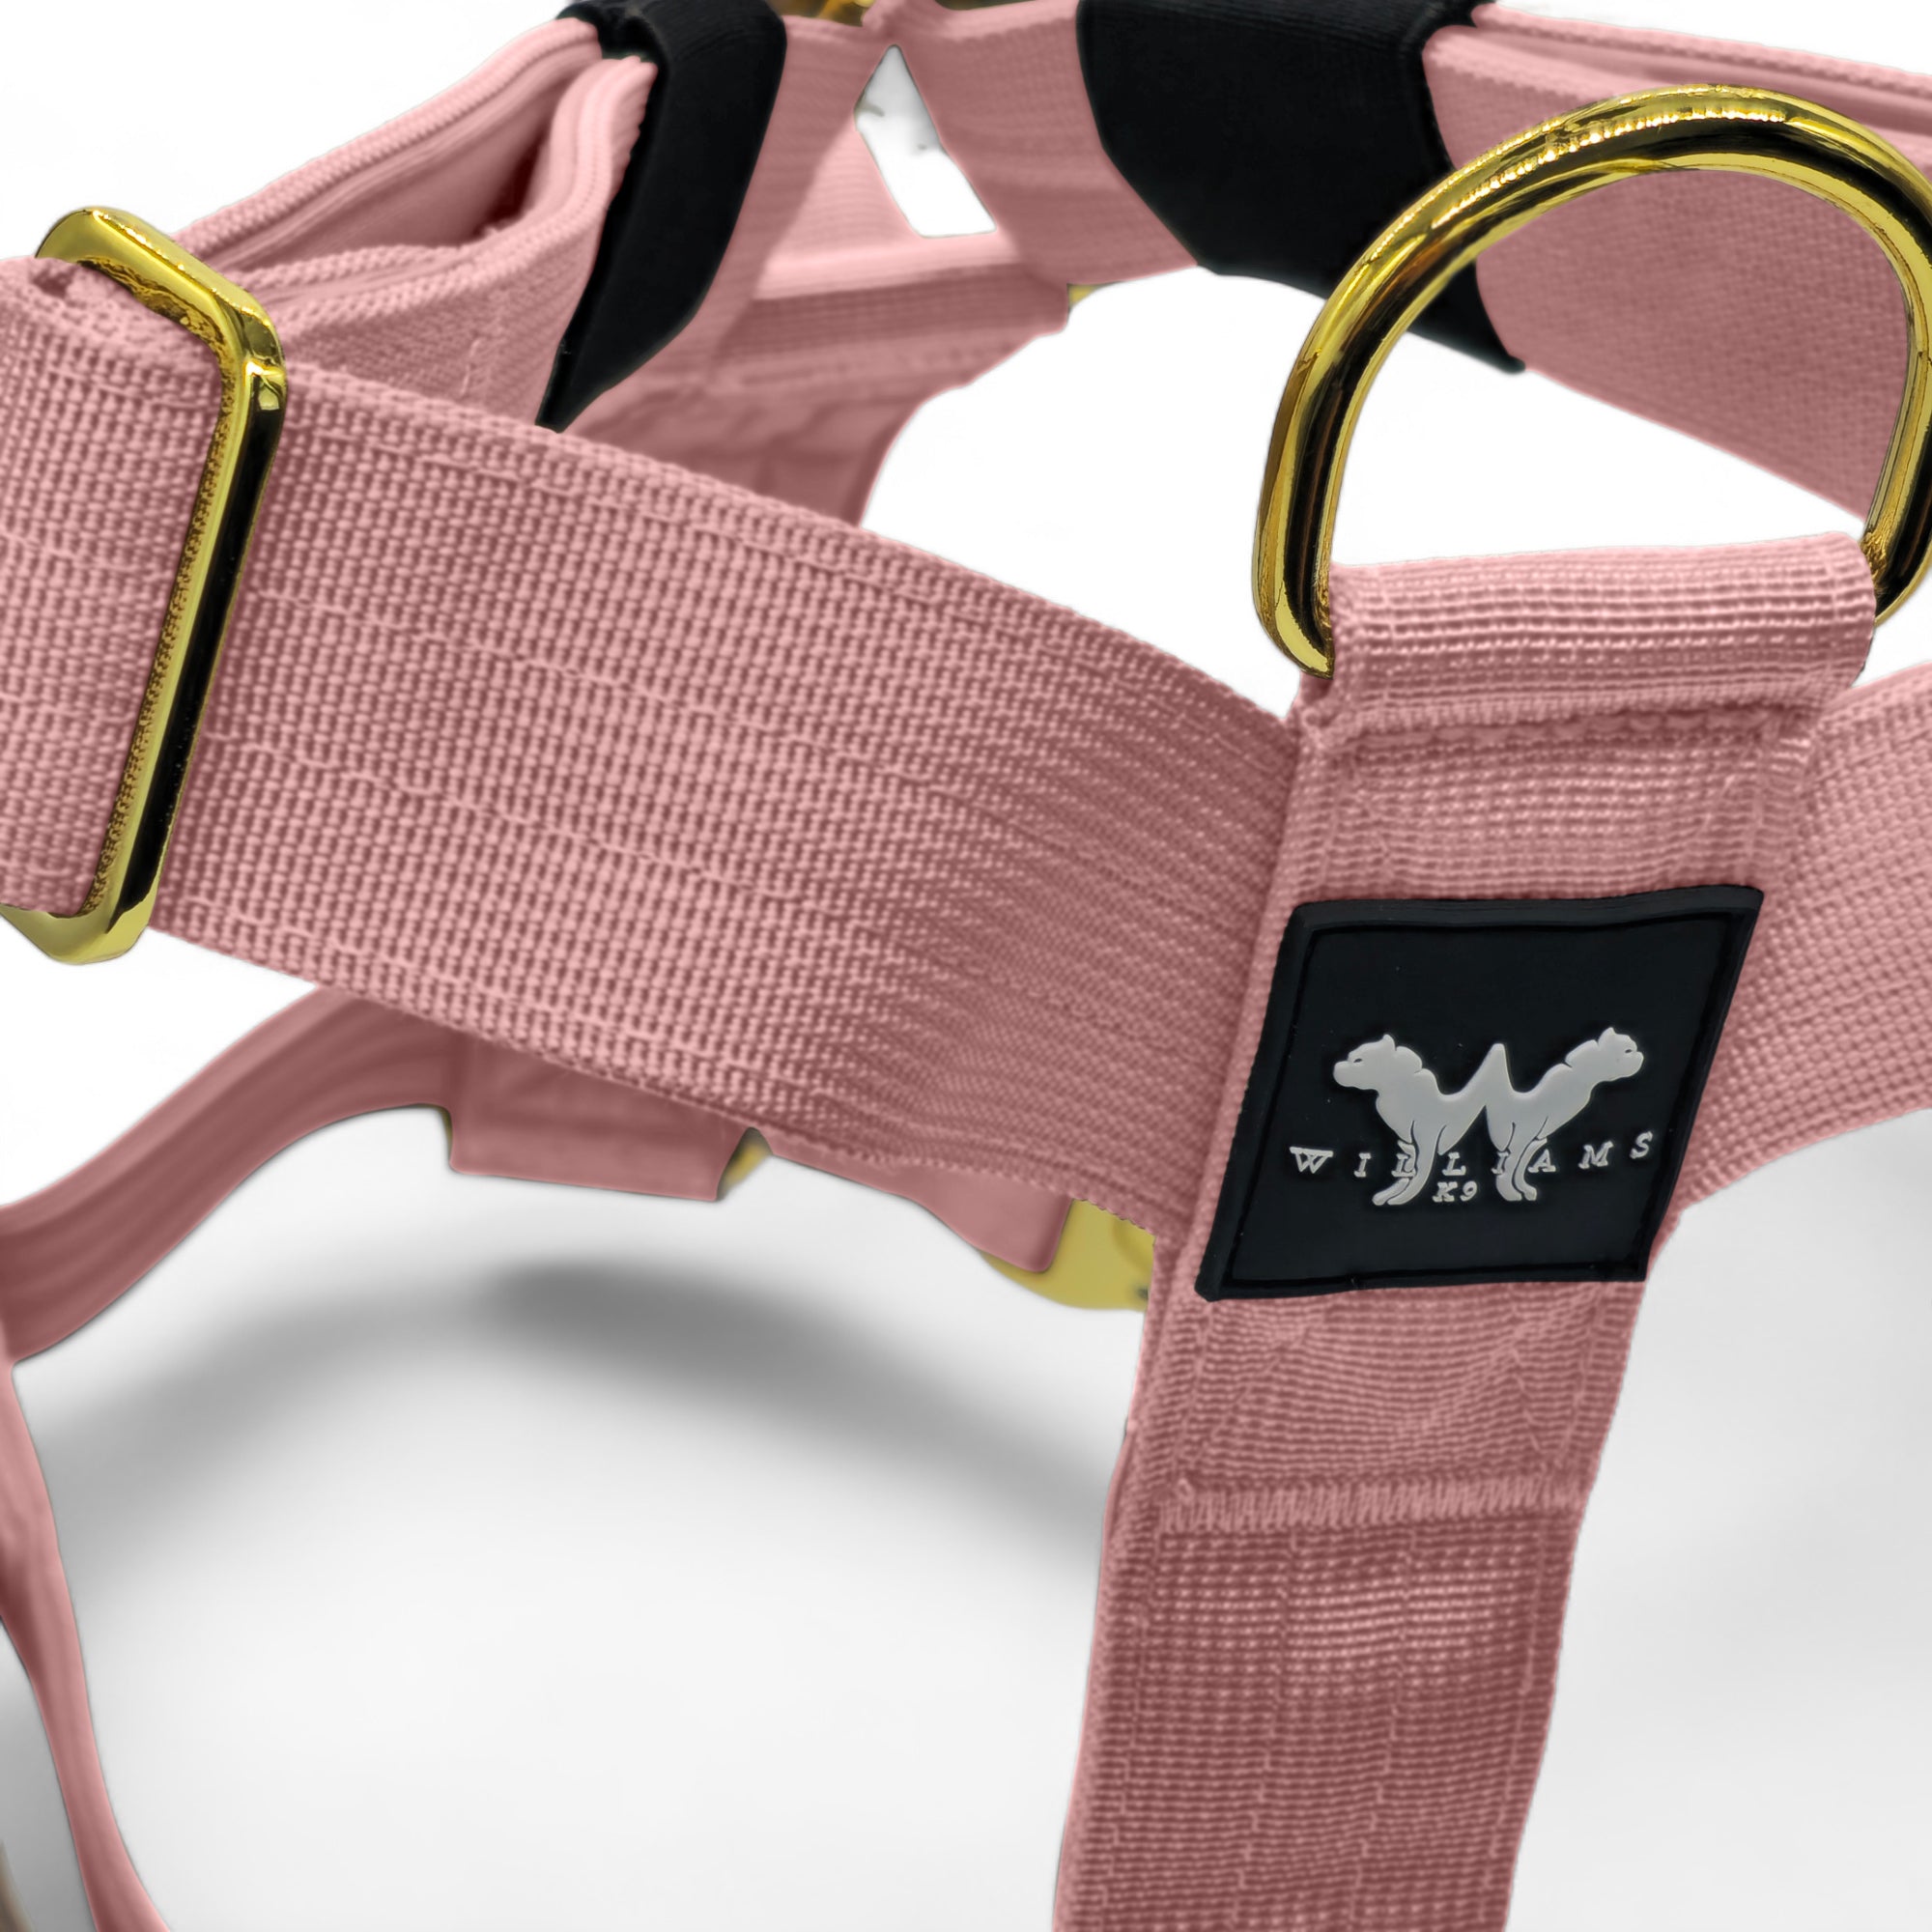 Anti-Pull Harness Soft Pink | Quad Stitched Nylon Adjustable With Control Handle